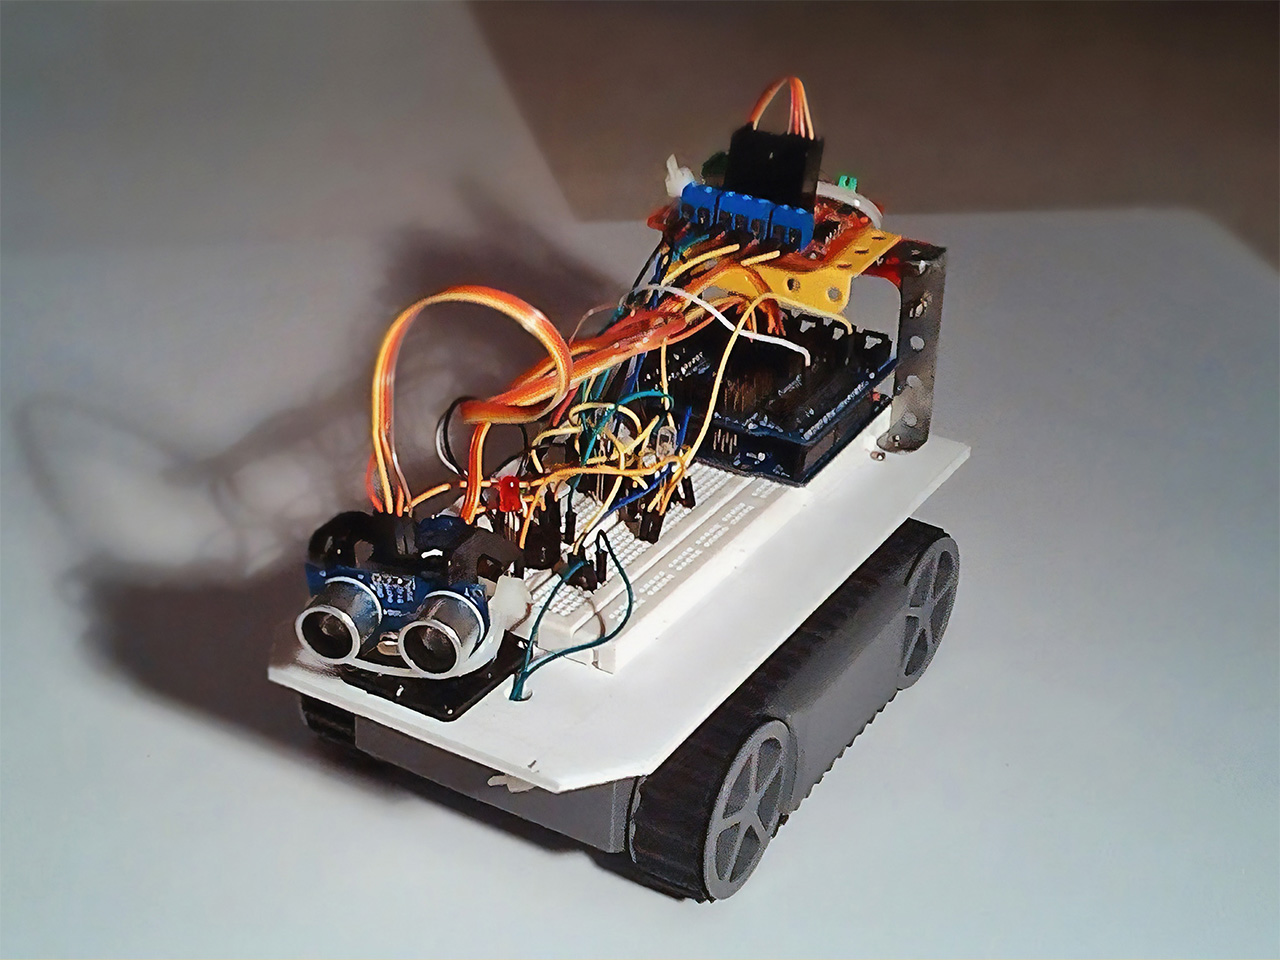 Picture of the explorer robot "Pancho"